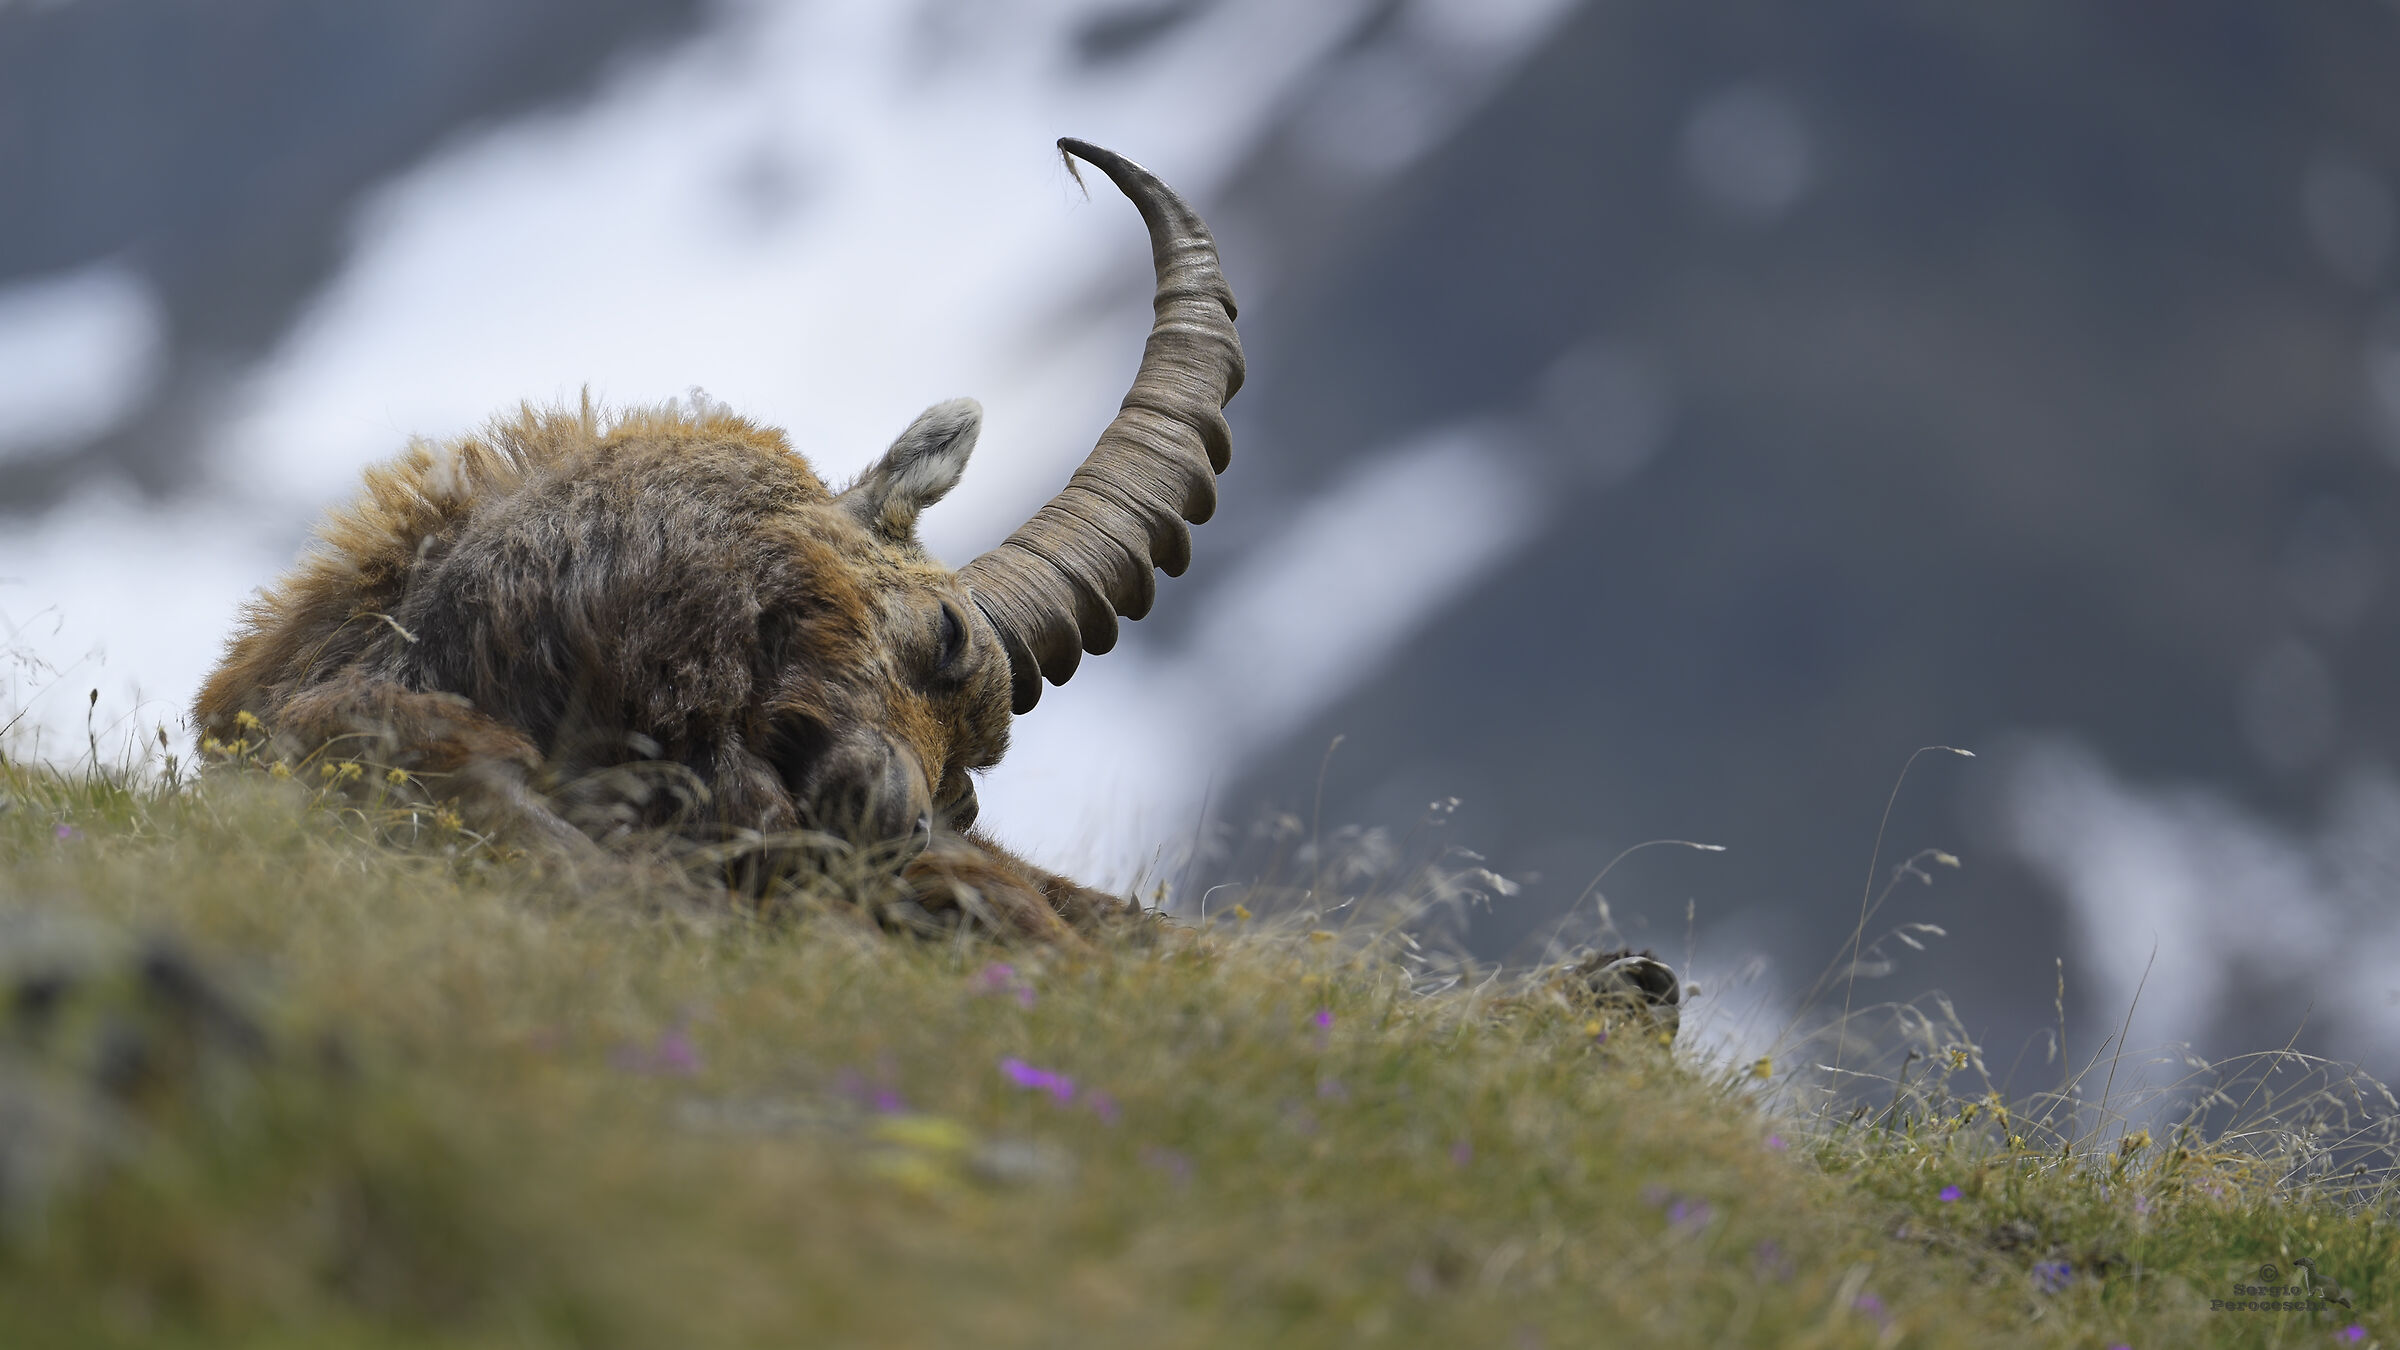 The nap of the ibex...